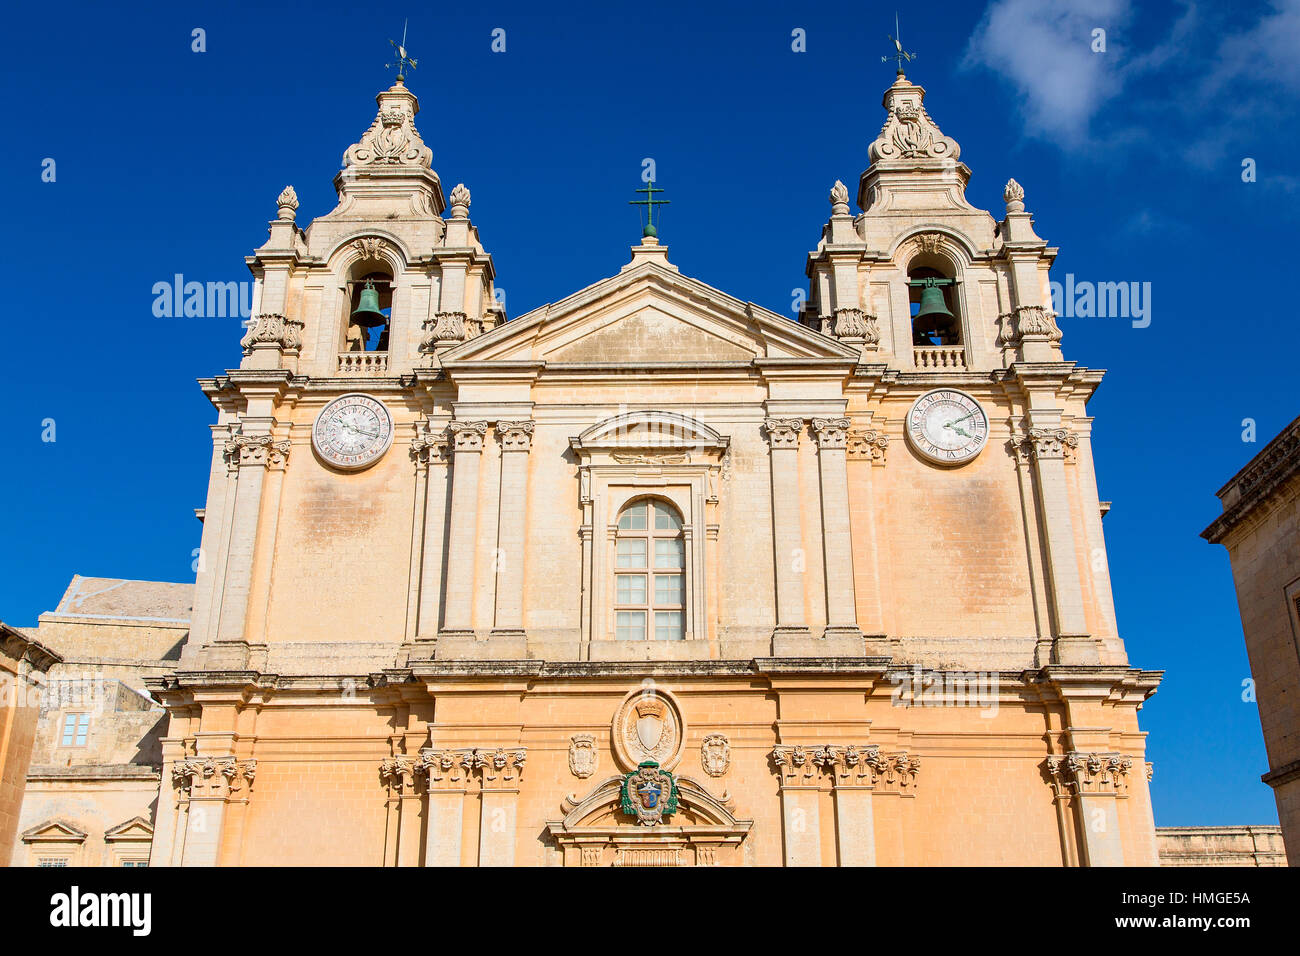 Malta, St. Paul's Cathedral in Mdina Stock Photo